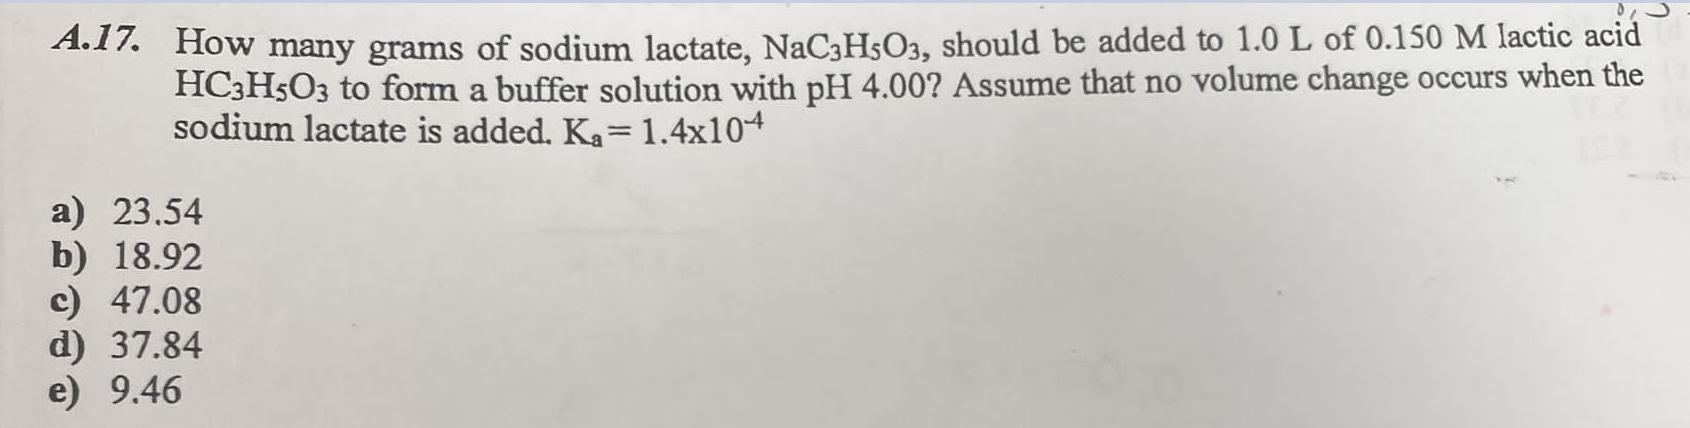 A.17. How many grams of sodium lactate, NaC3H5O3, should be added to 1.0 L of 0.150 M lactic acid HC3H5O3 to